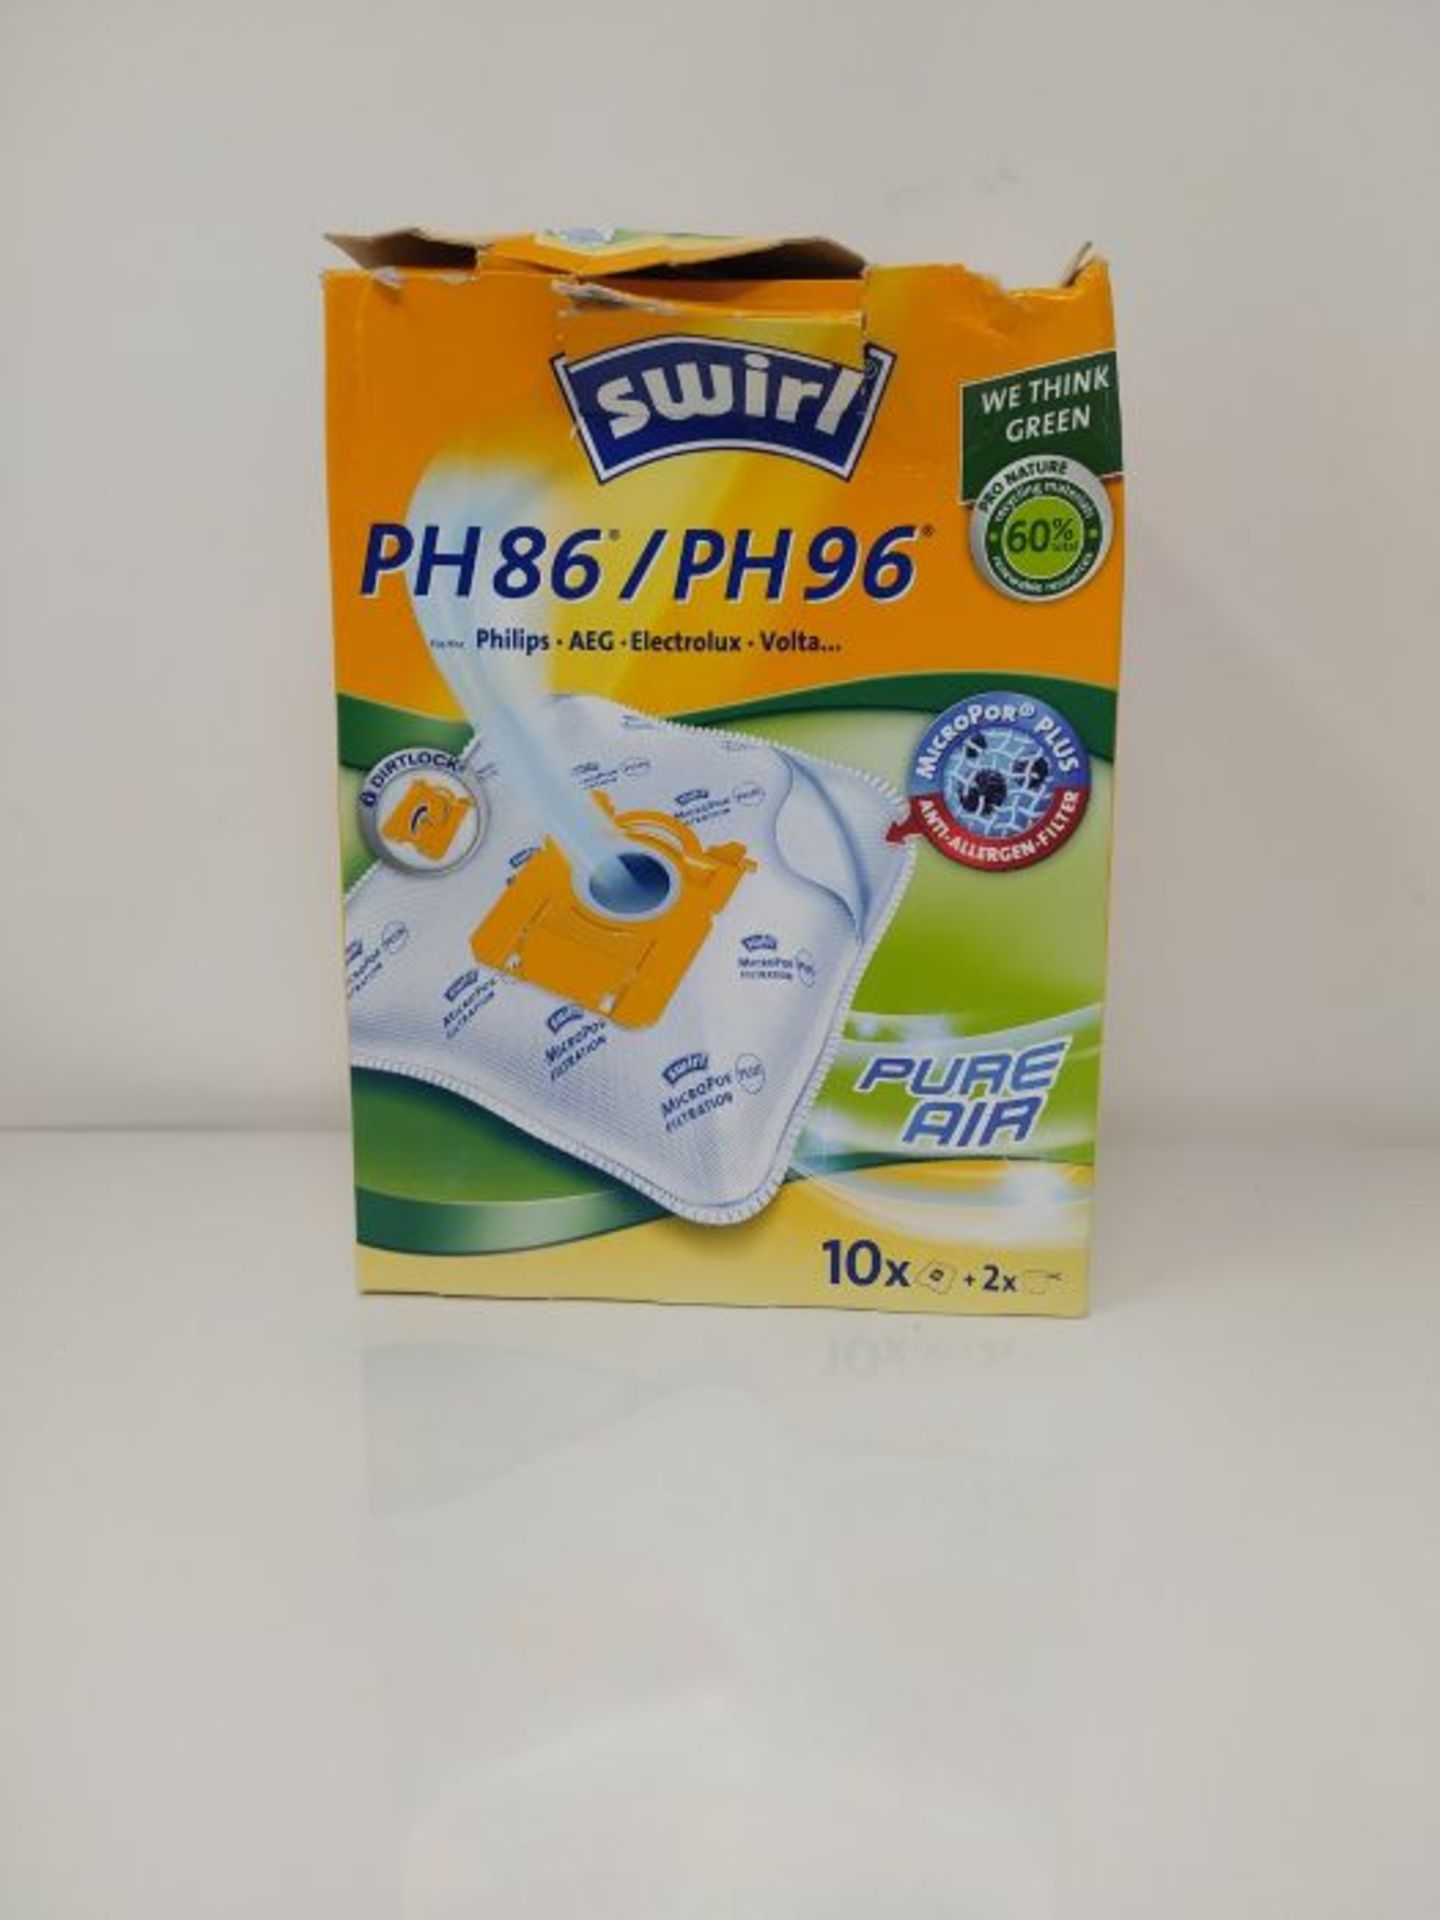 Swirl PH 86 AirSpace Vacuum Cleaner Bags for Philips, AEG Vacuum Cleaners, Highly Abso - Image 2 of 3